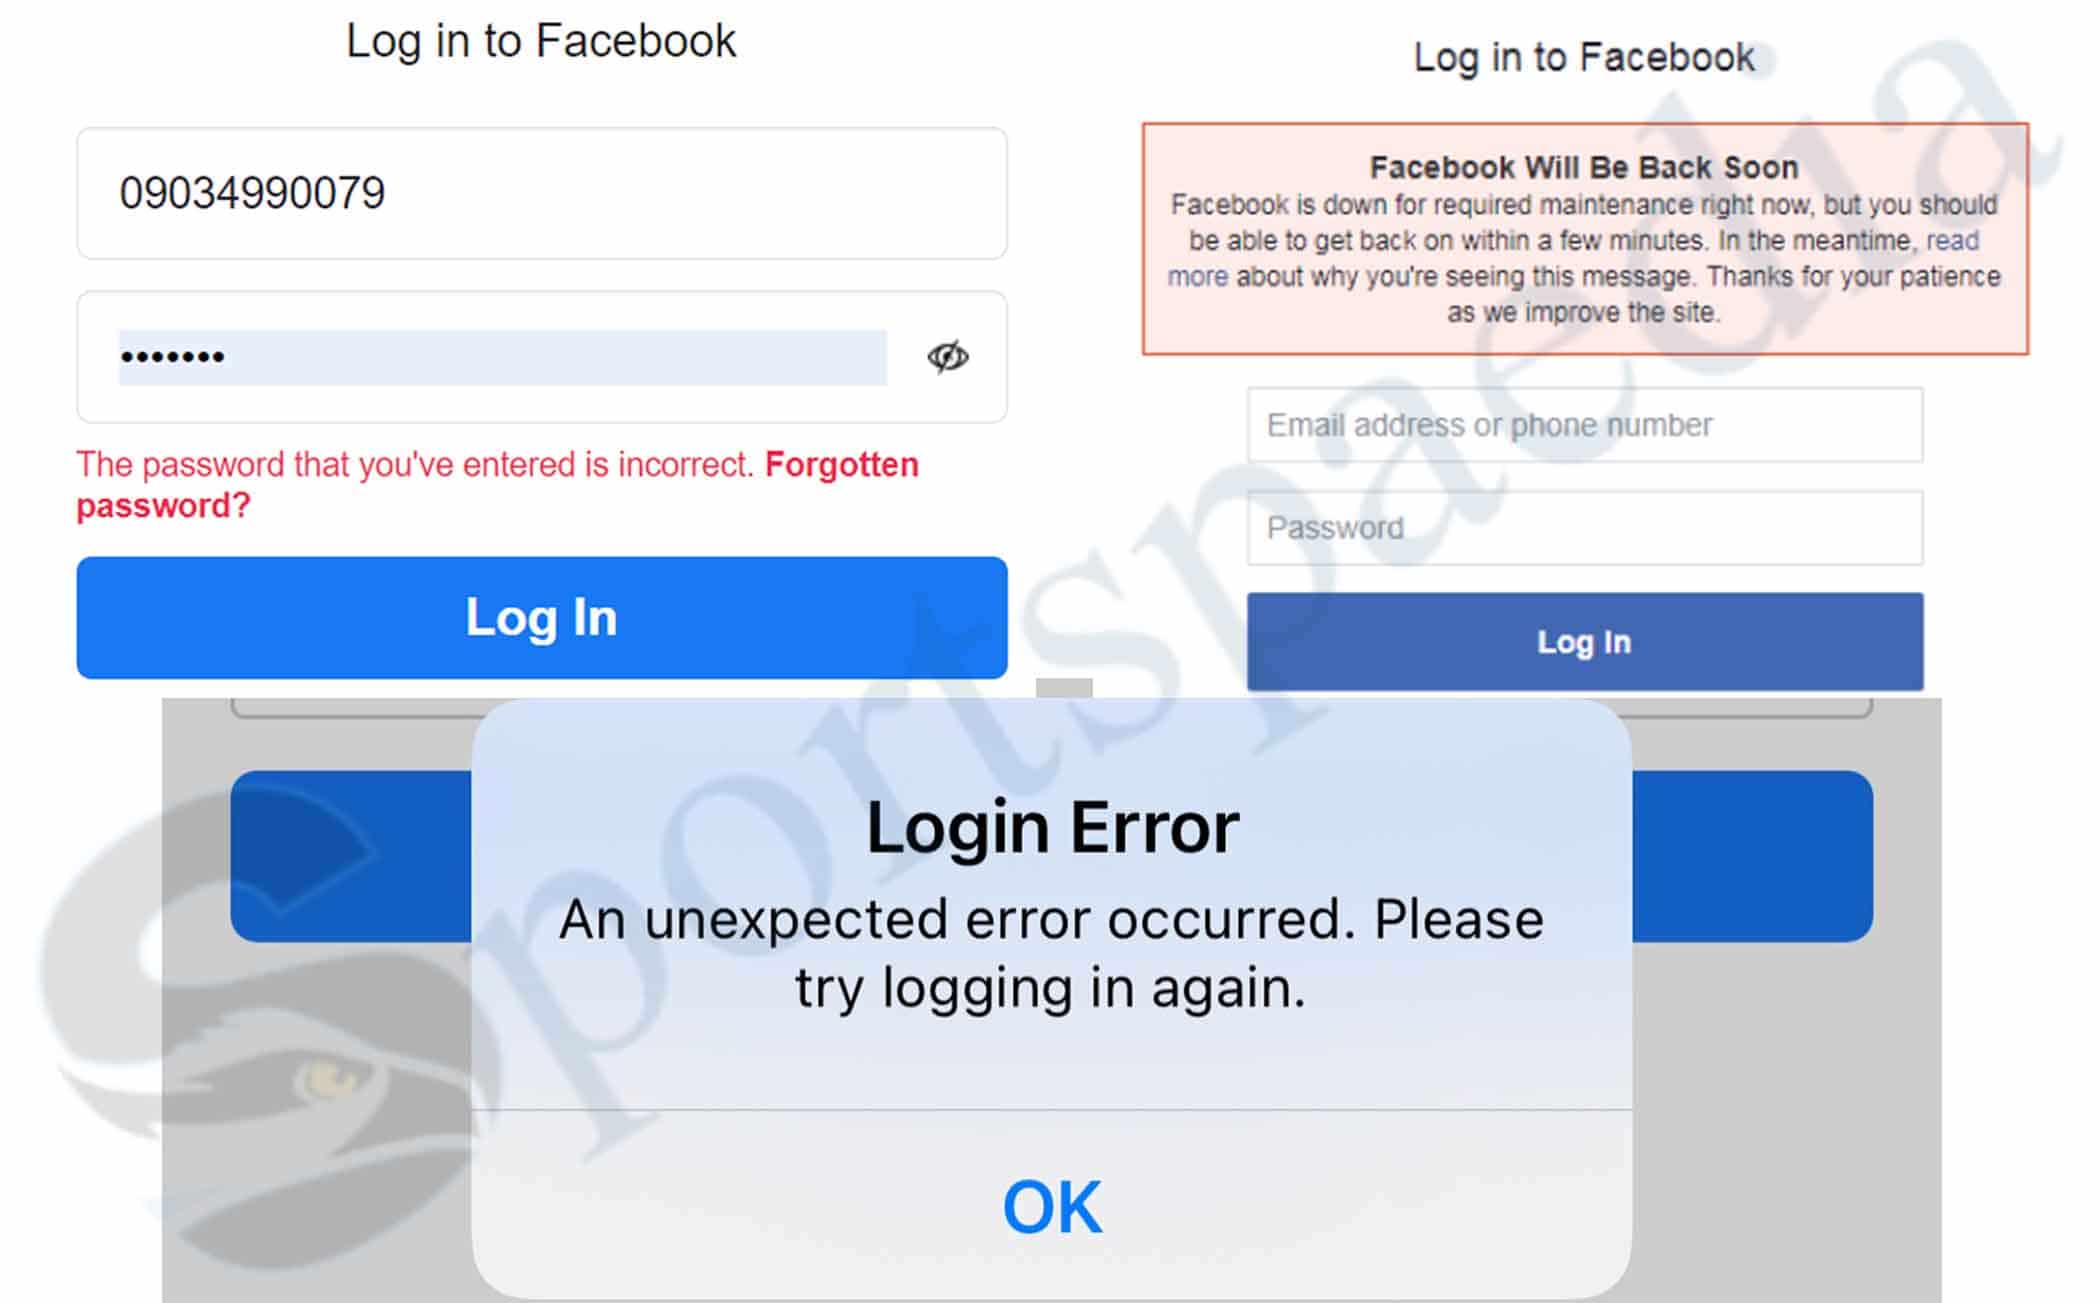 Incorrect Password Error Message when trying to log into Facebook